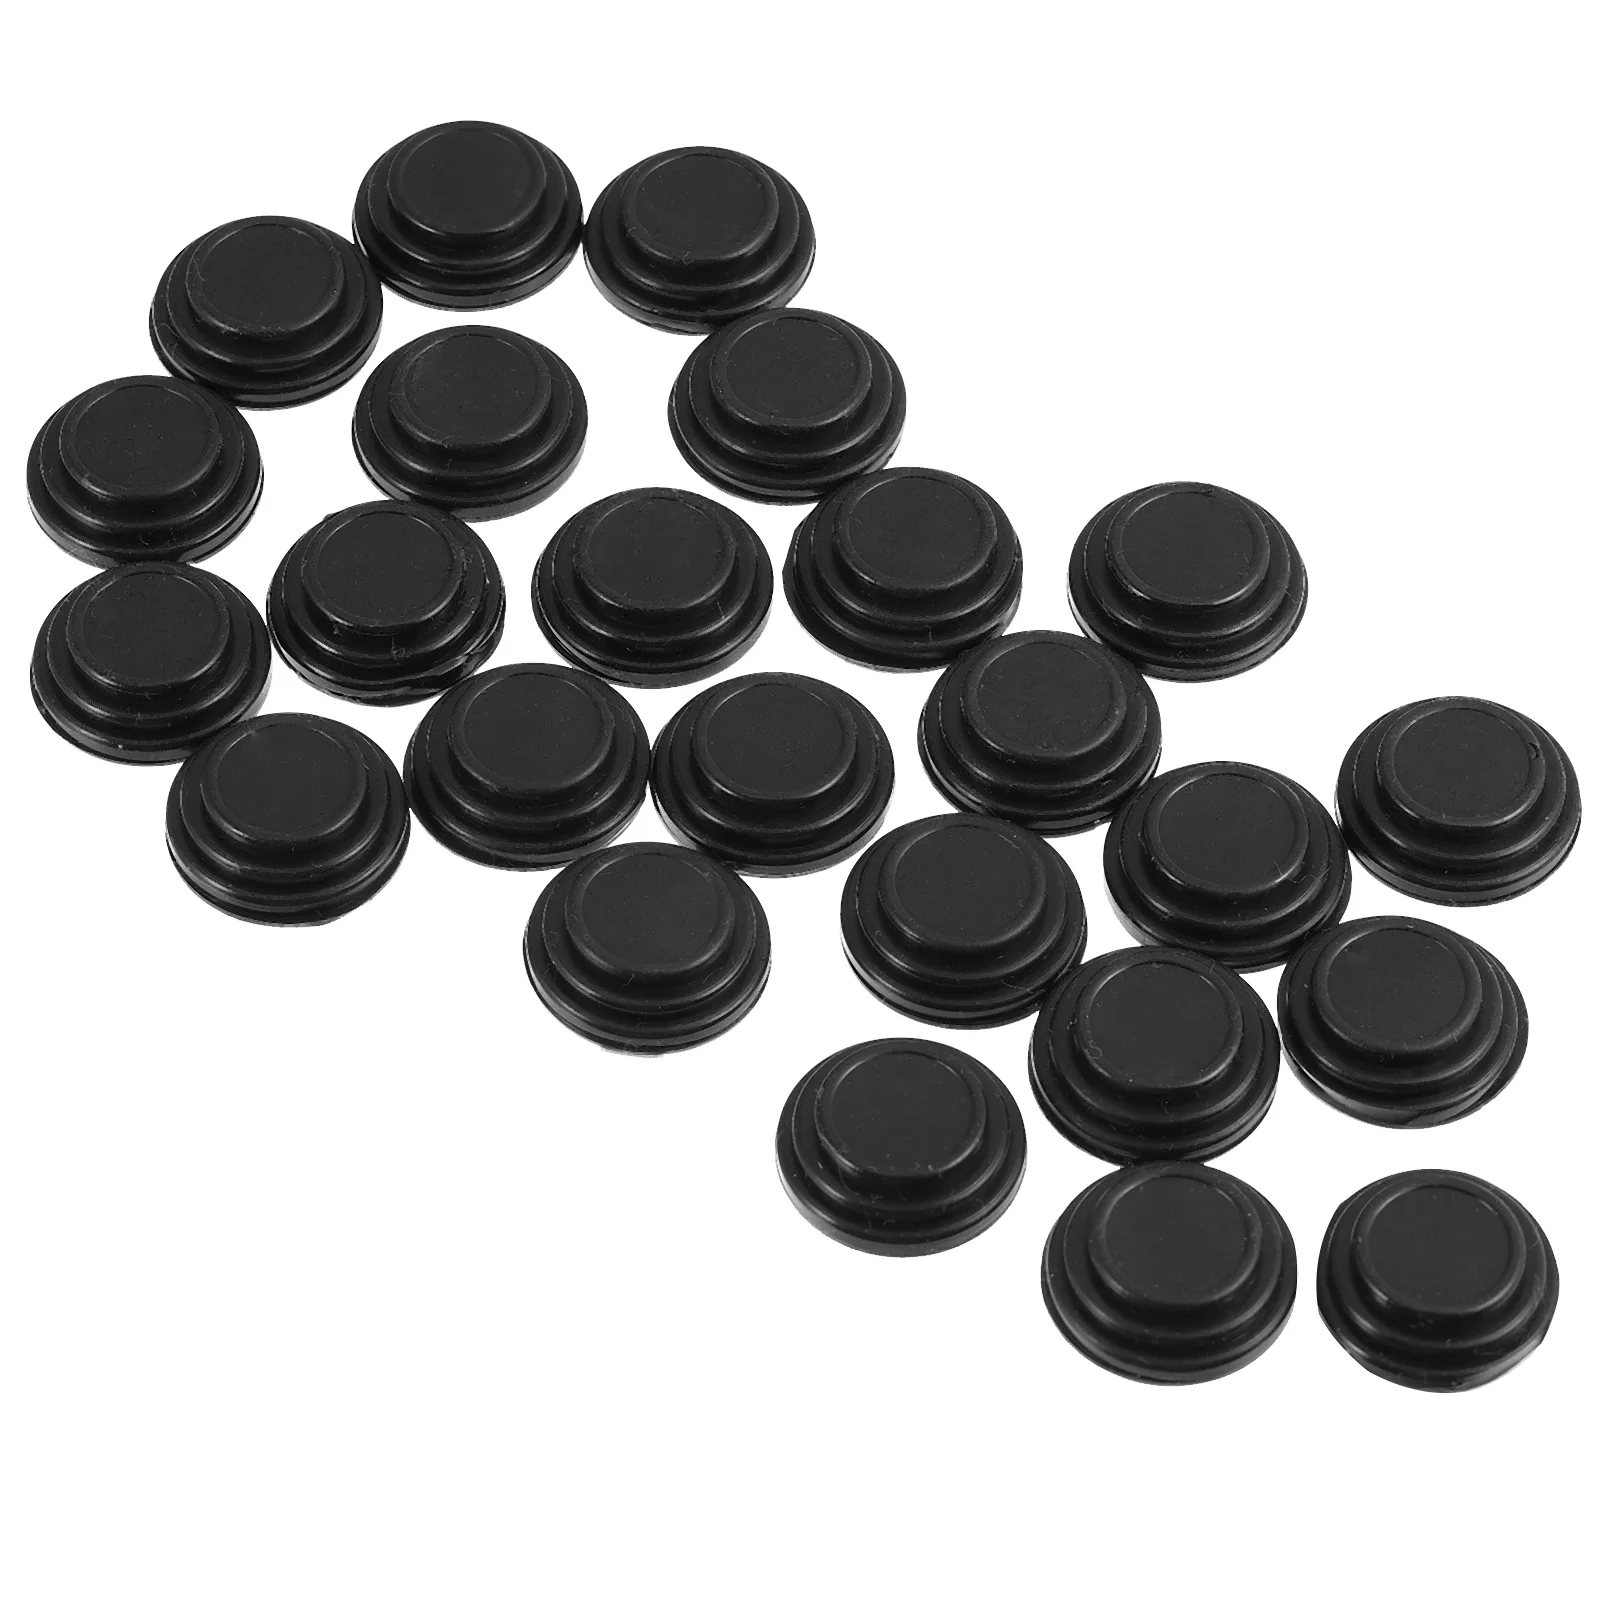 

24 Pcs Shock Absorbing Gasket Protective Pads for Car Door Anti-collision Silicone Stickers Silica Gel Scratch-Resistant